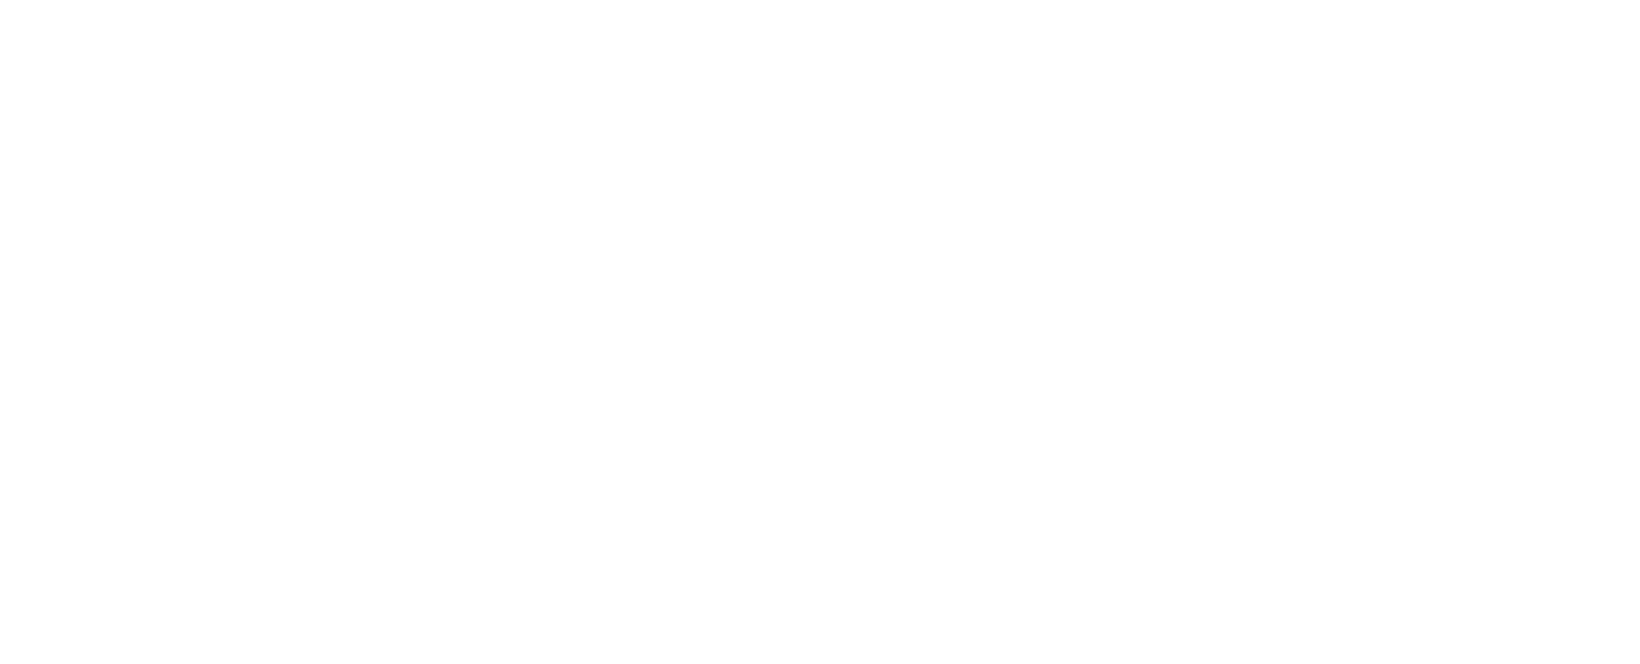 storm orchestra logo and parachute